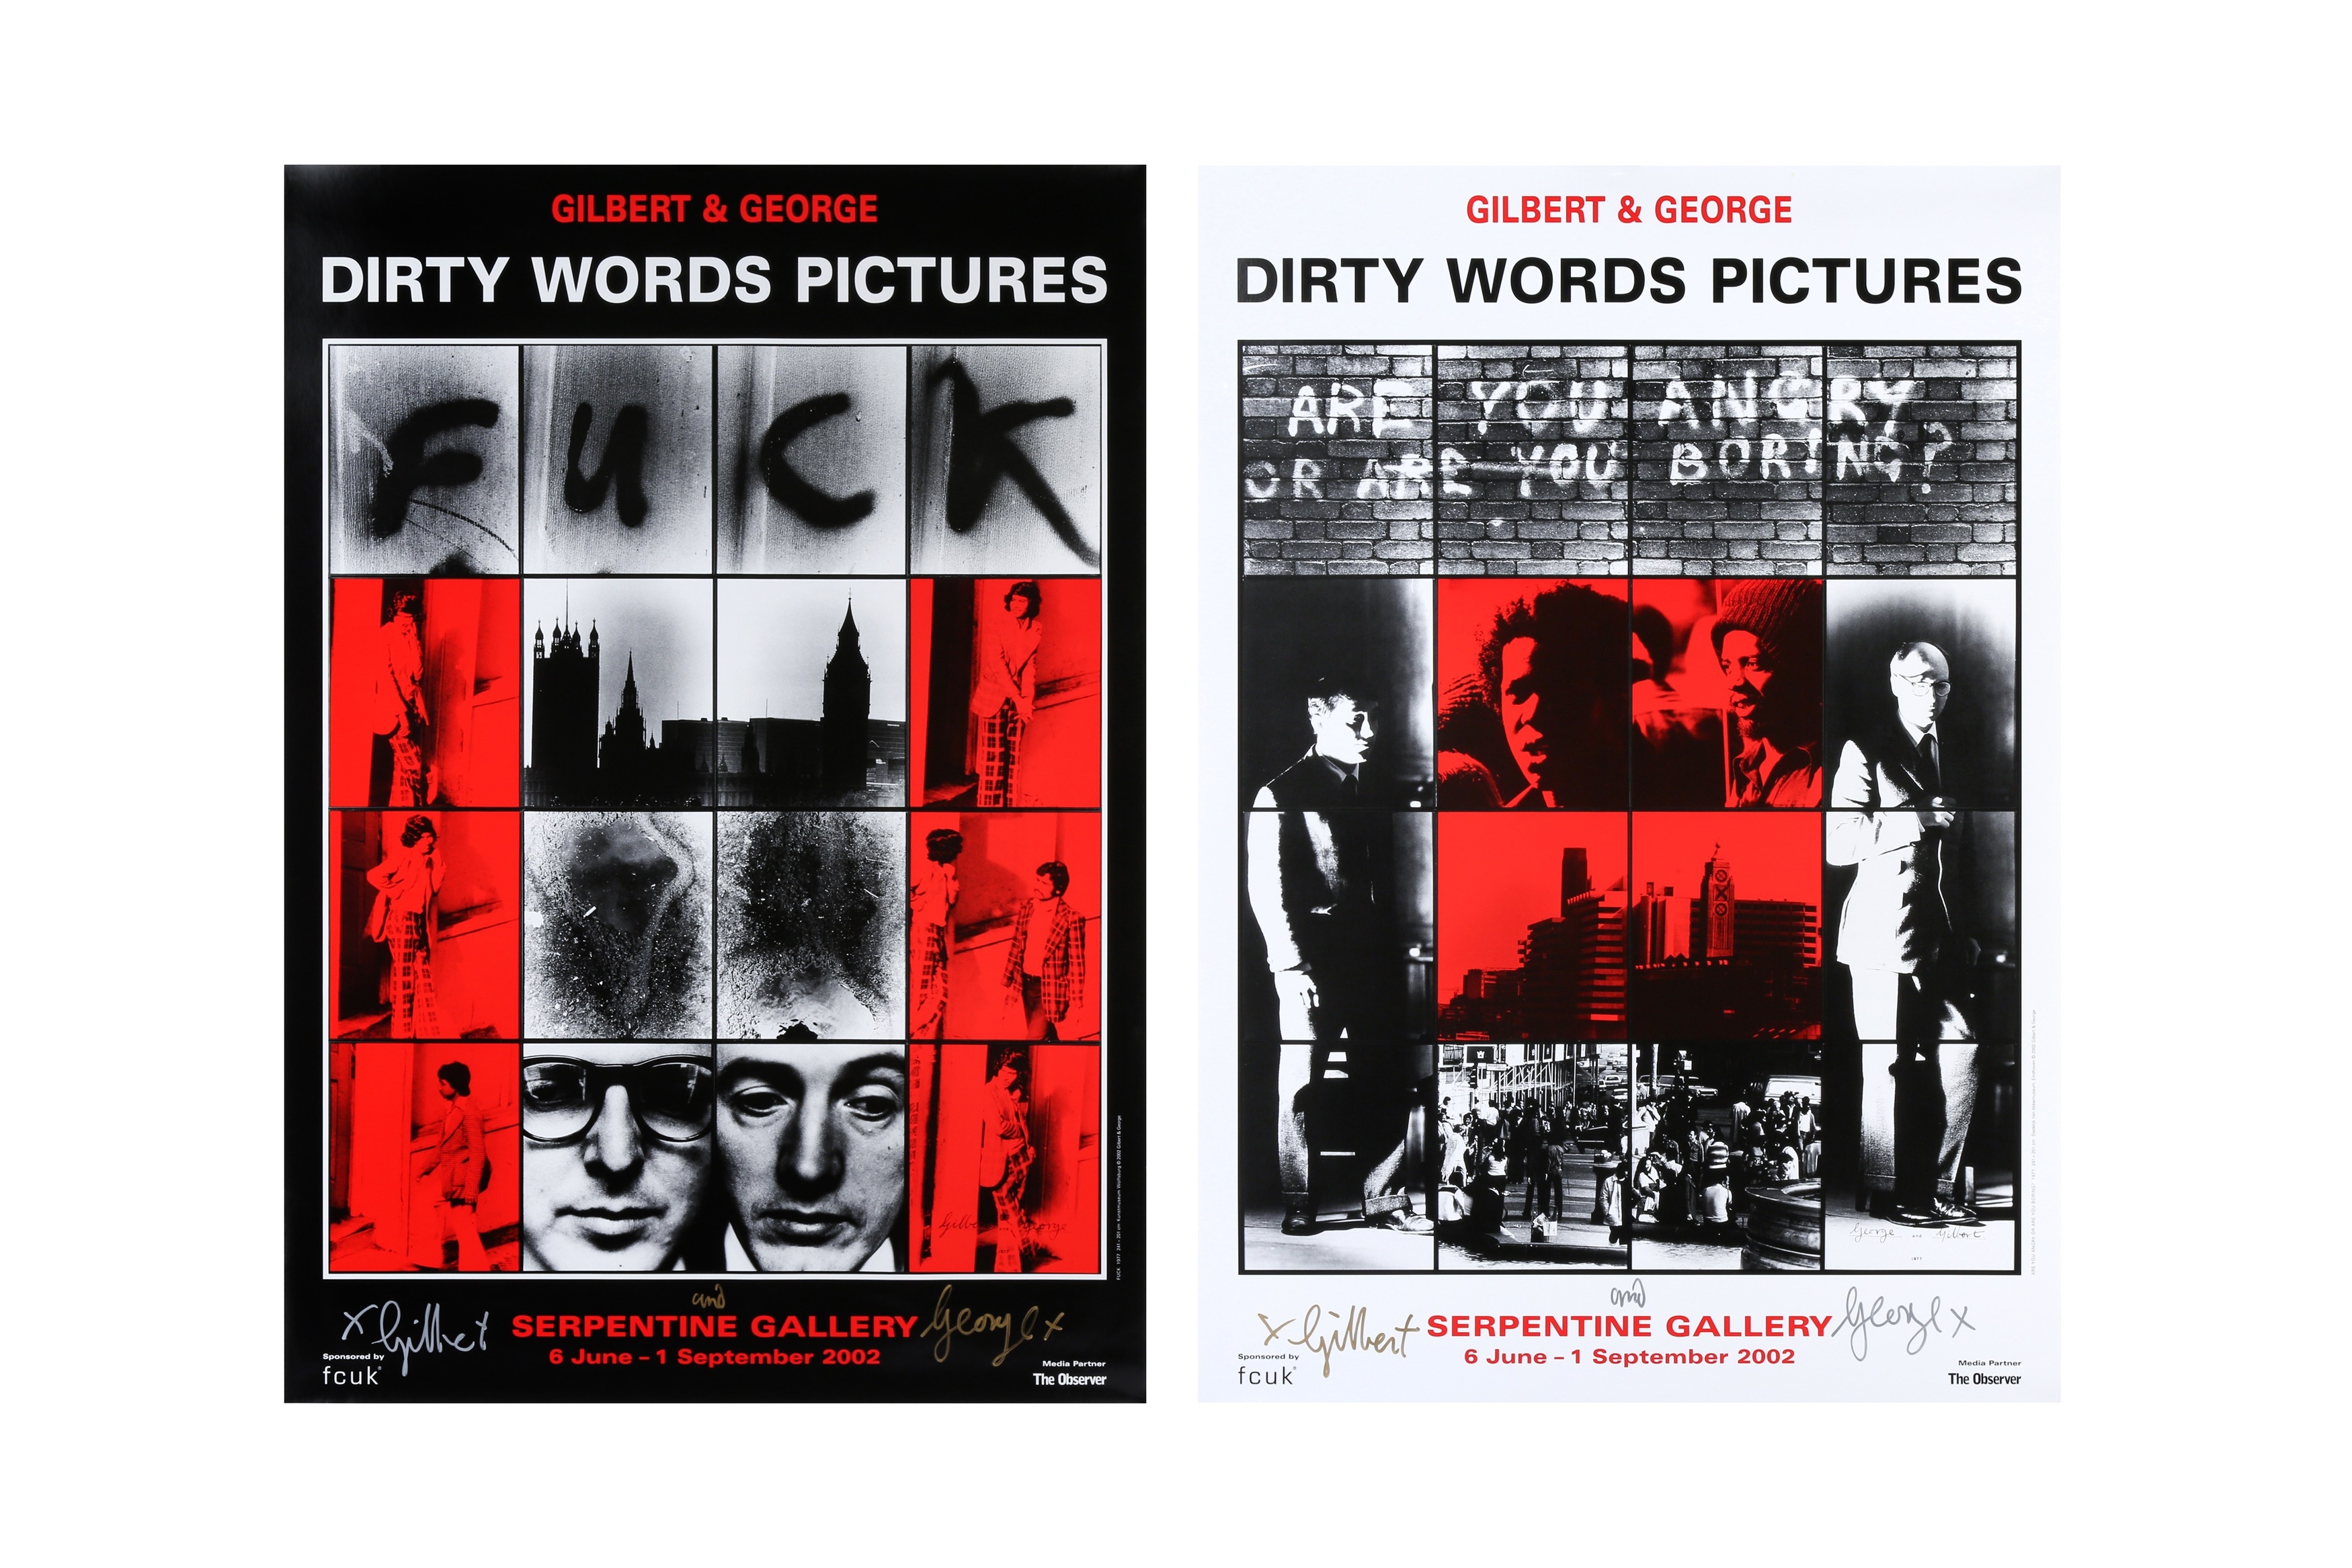 Dirty Words Pictures by Gilbert & George, 1943